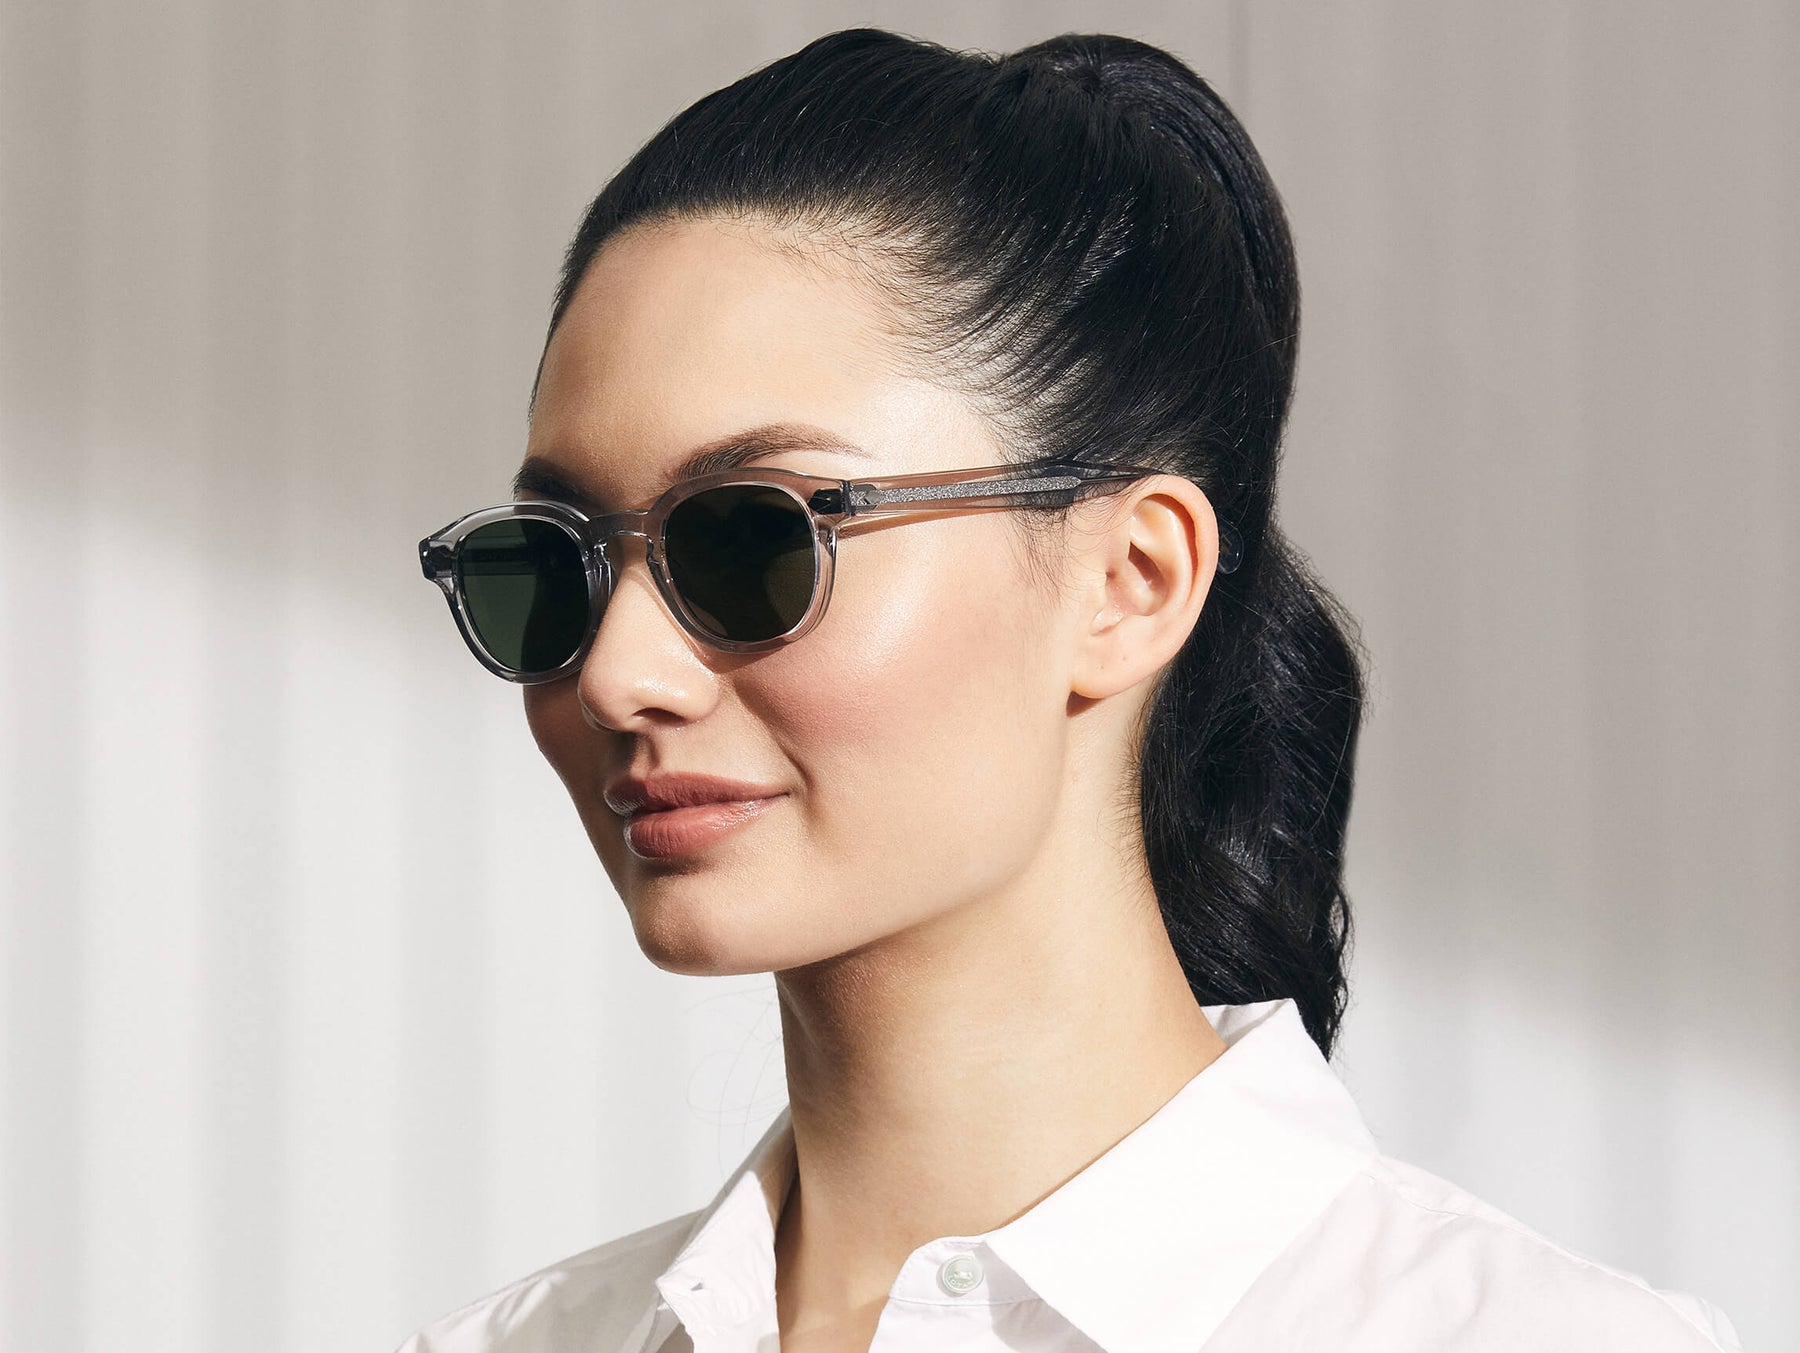 Model is wearing The LEMTOSH SUN in Light Grey in size 49 with G-15 Glass Lenses